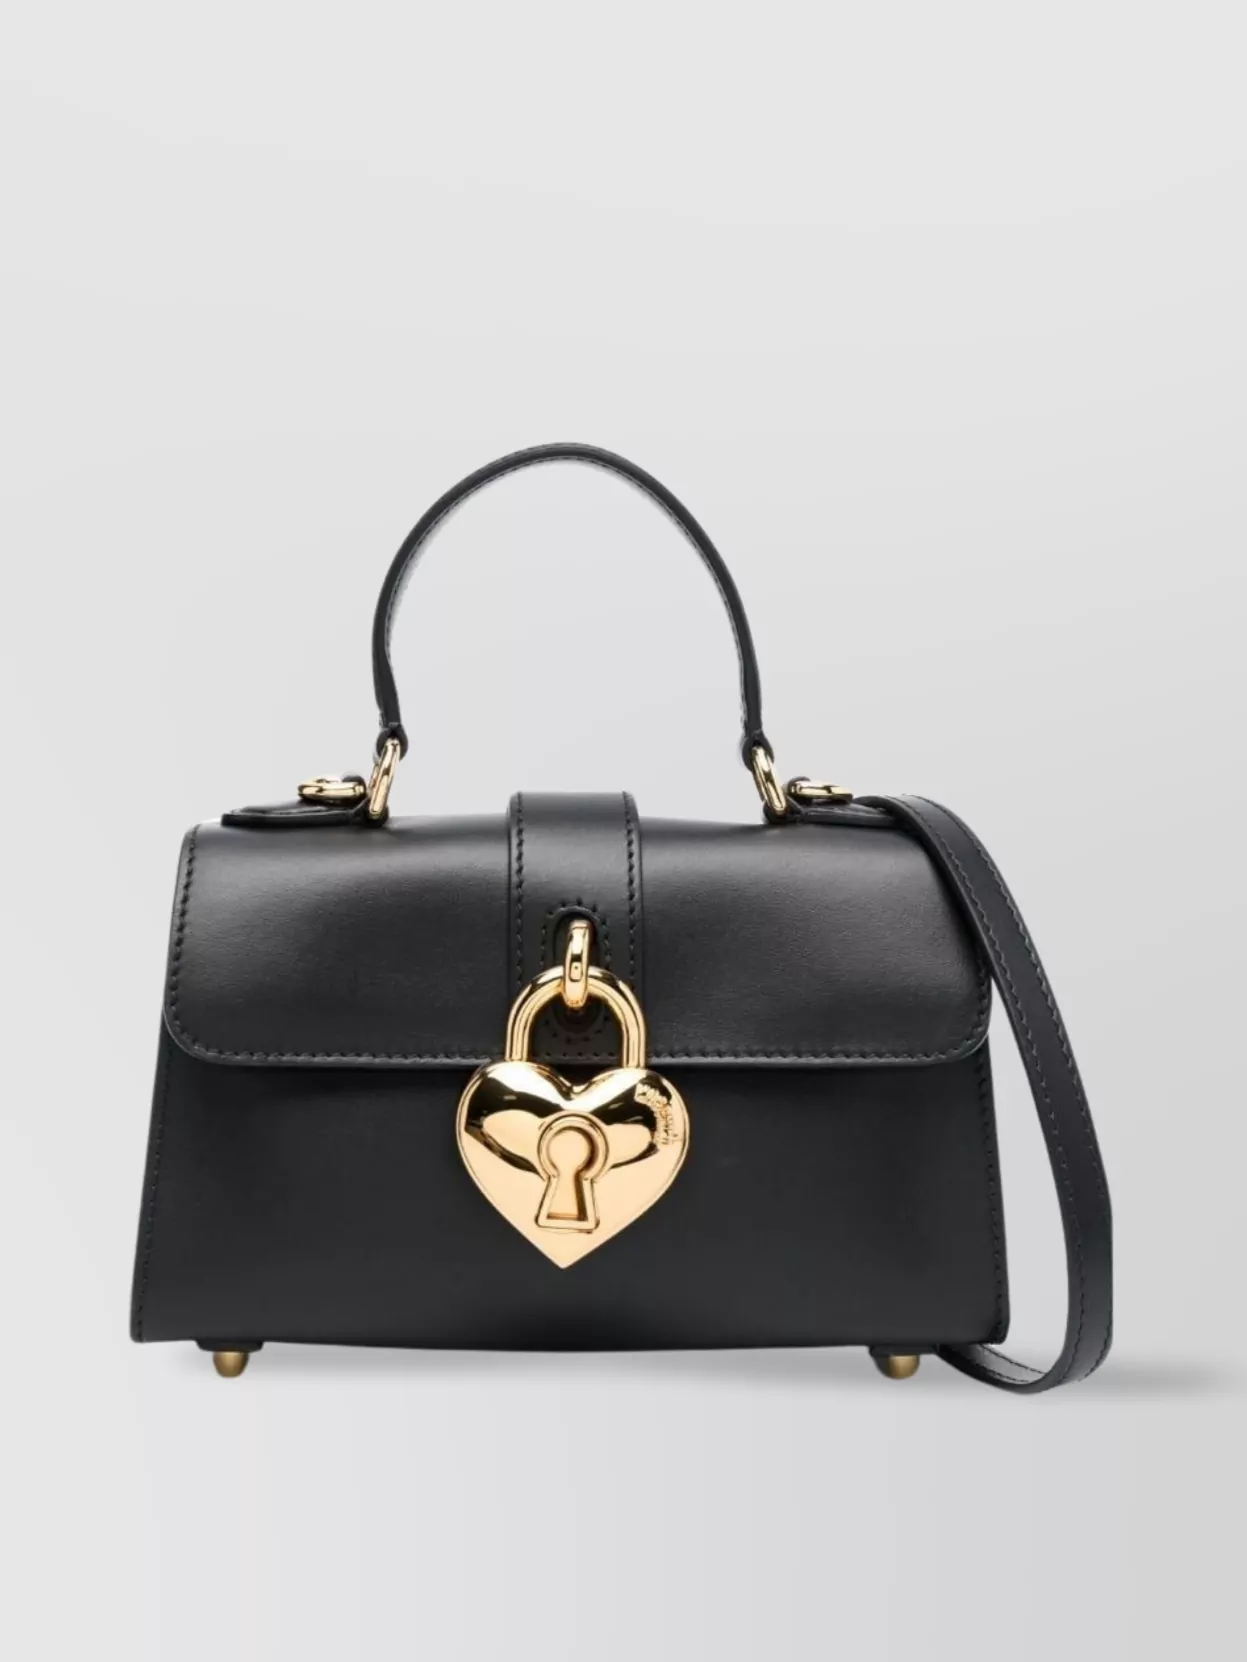 MOSCHINO DETACHABLE STRAP LEATHER BAG WITH HEART LOCK CHARM